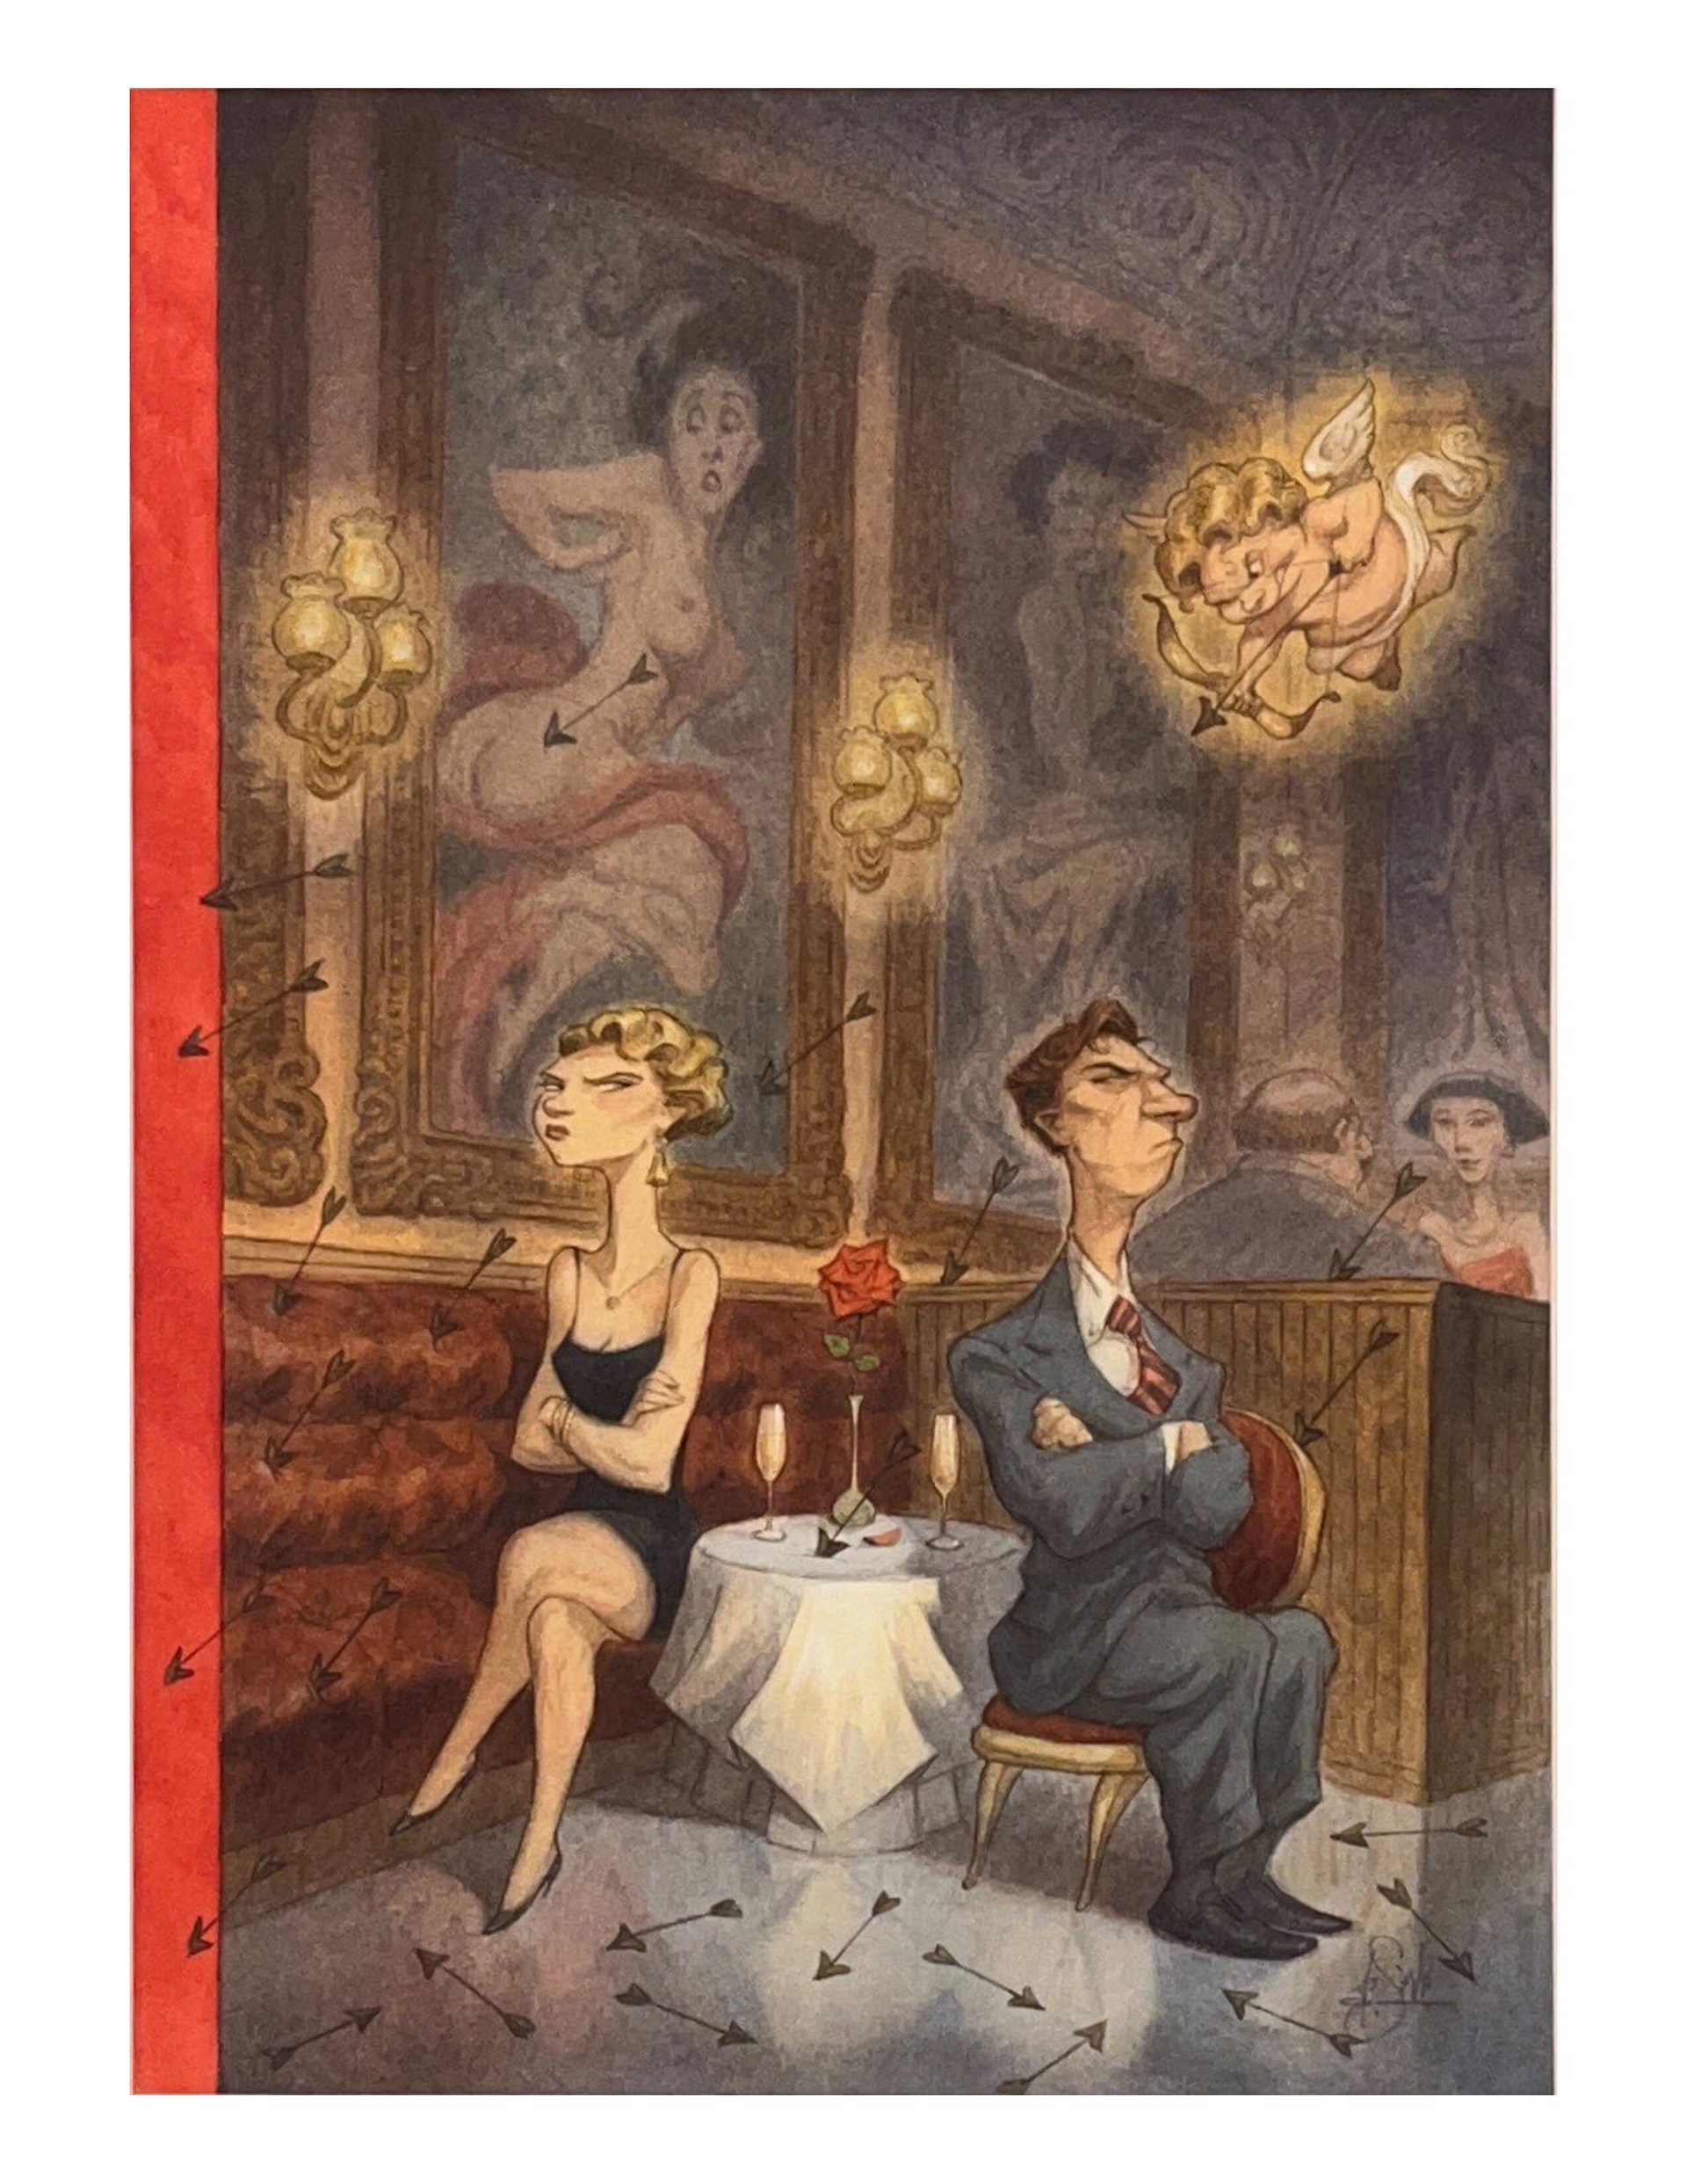 New Yorker Cover "Cupid's volley" by Peter de Sève